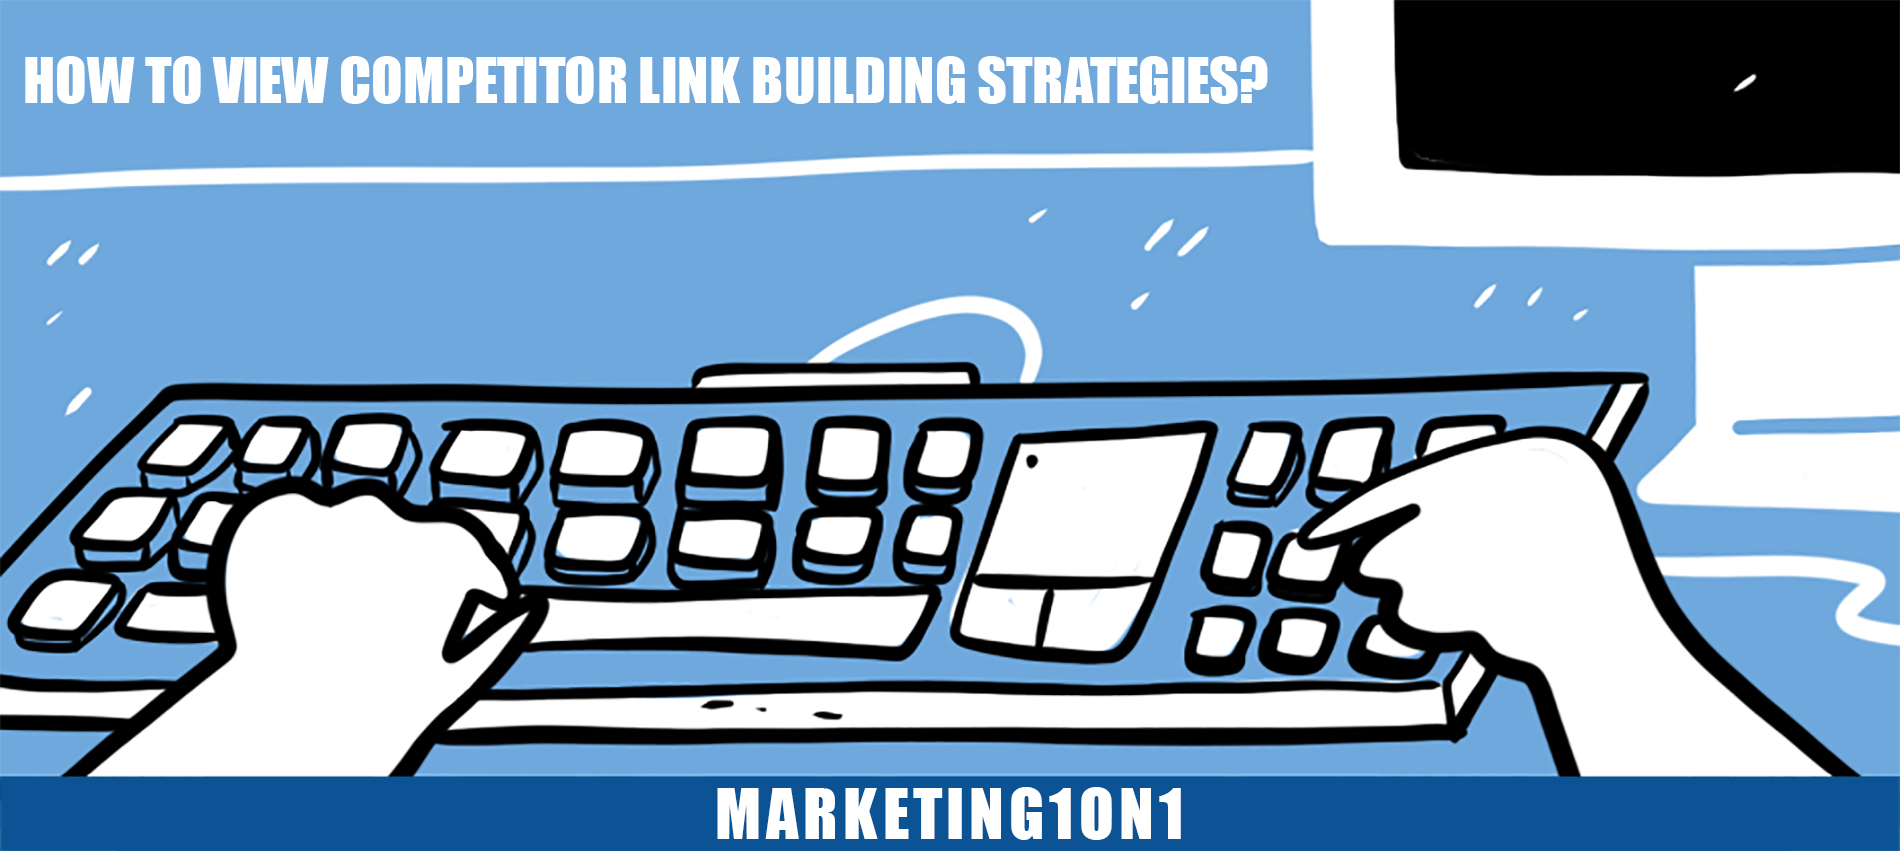 How to view competitor link building strategies?